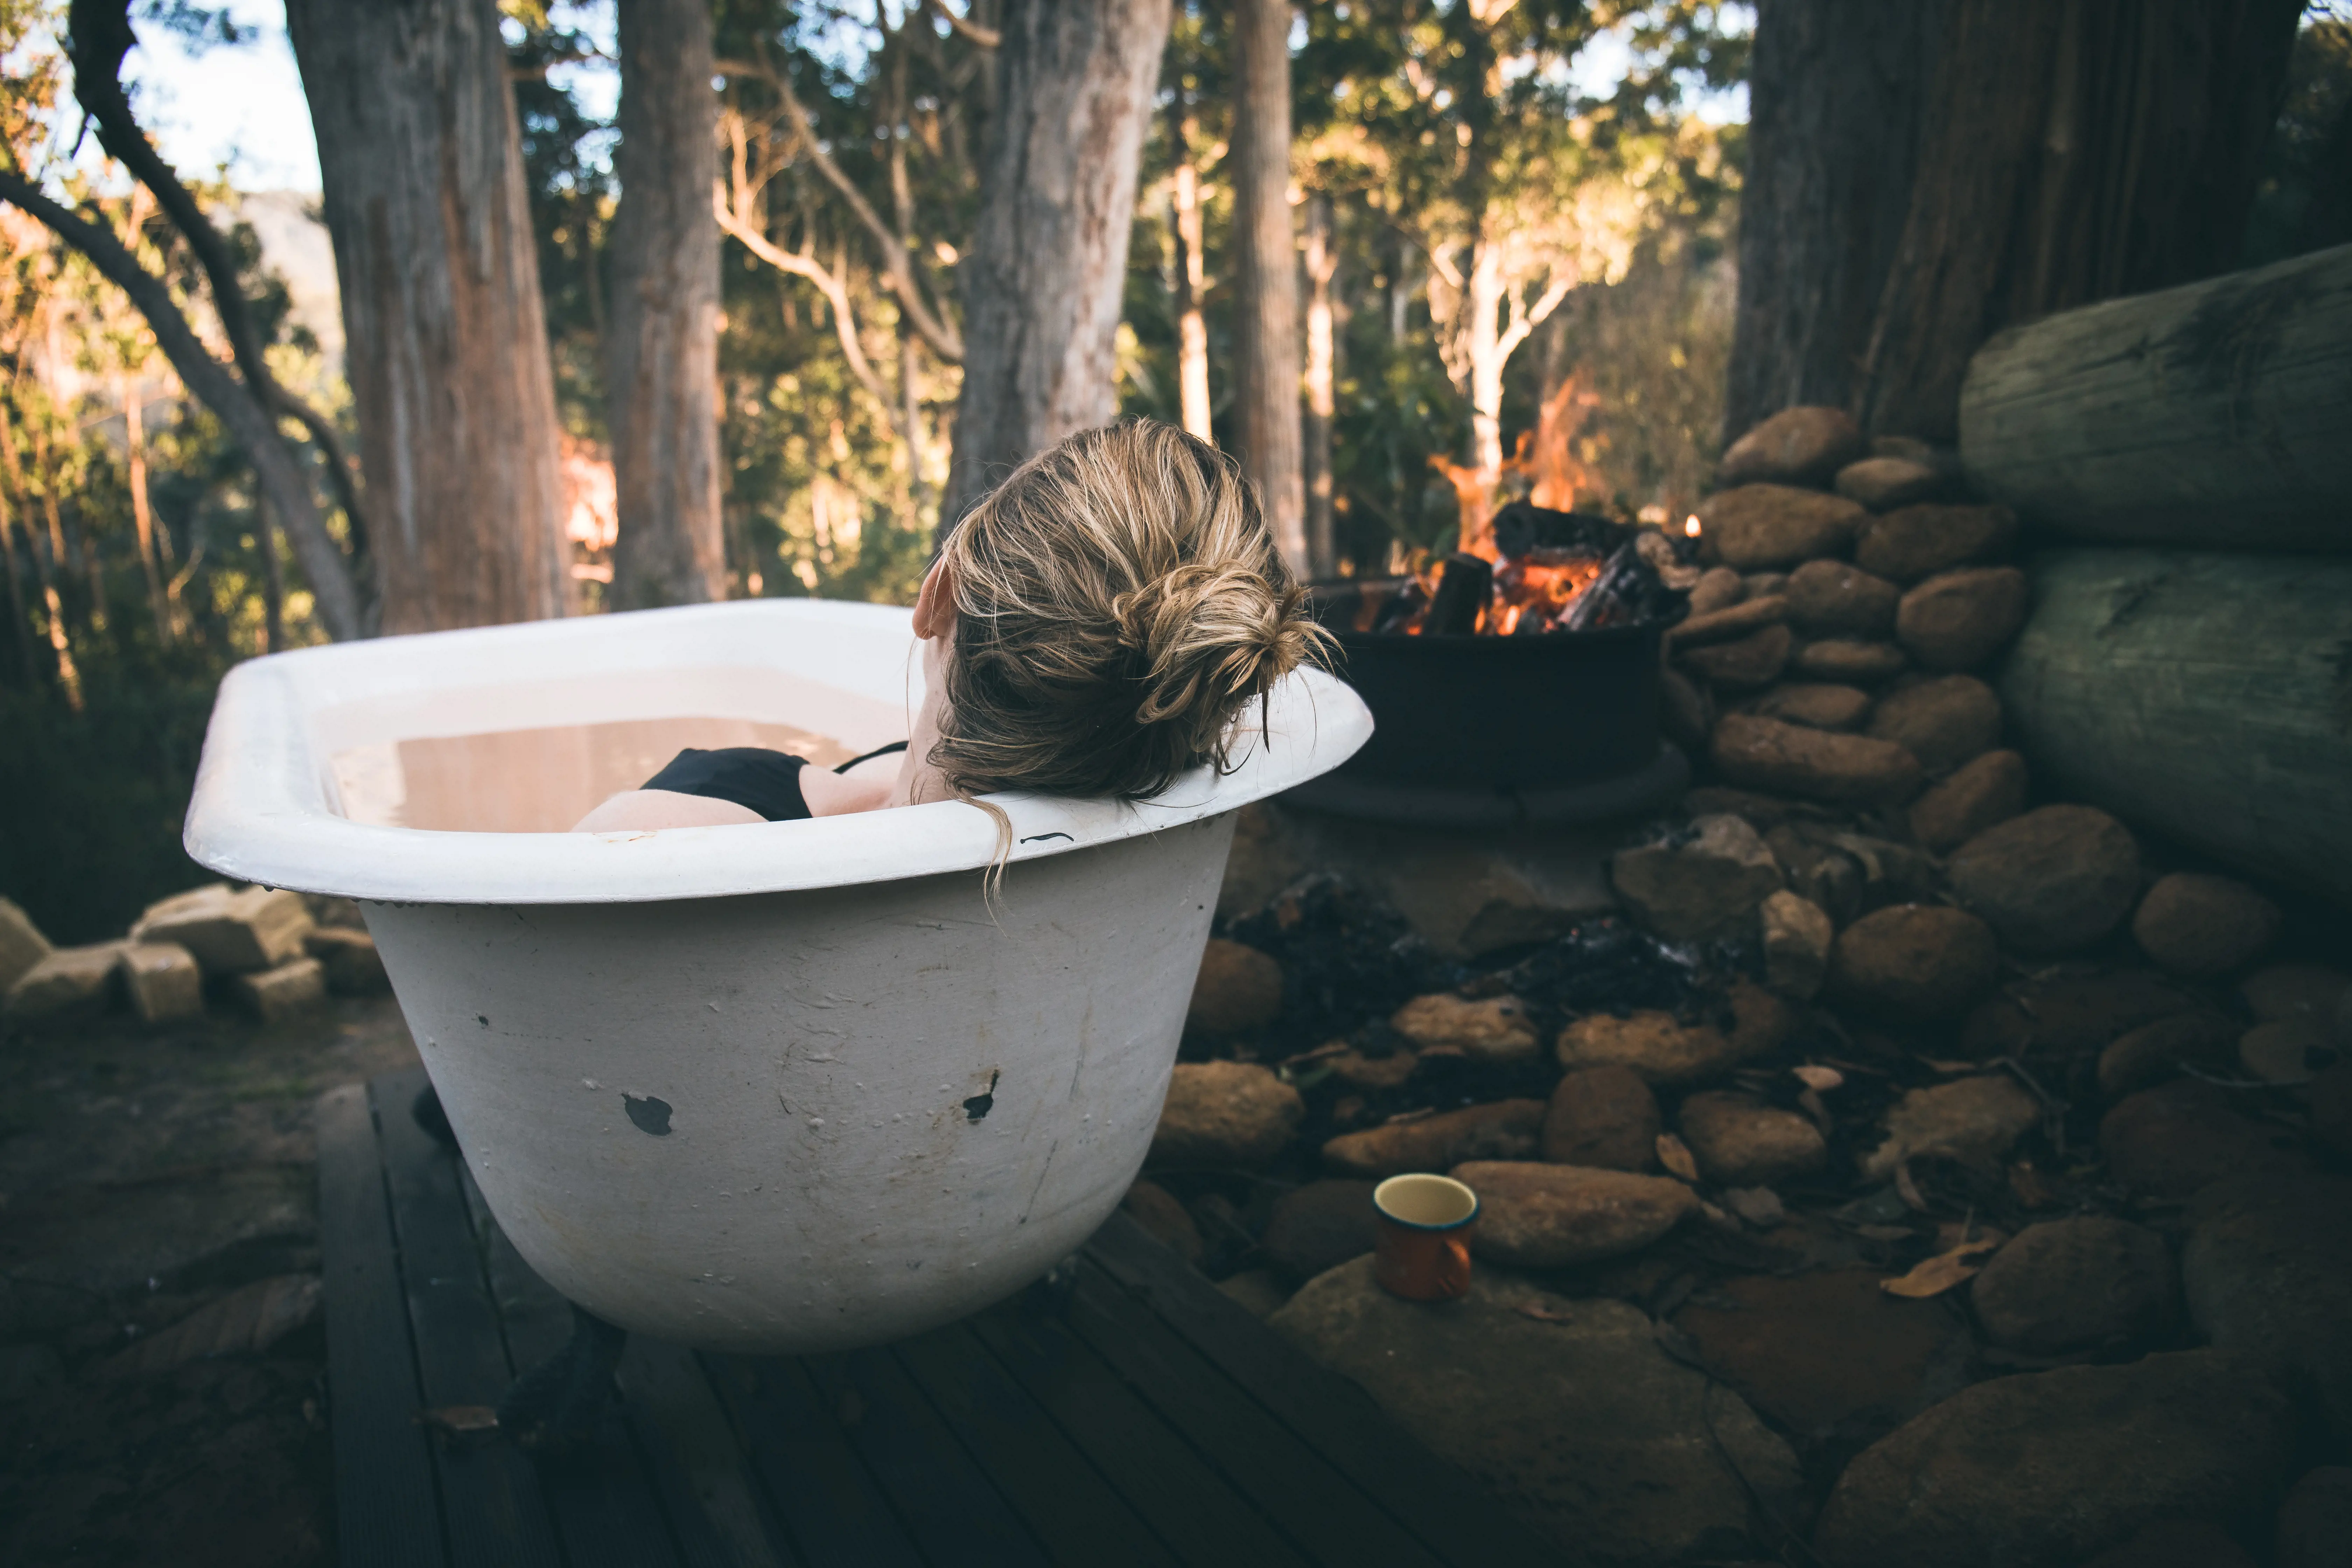 A woman reclines in a bath next to a wood fire in a eucalyptus forest.